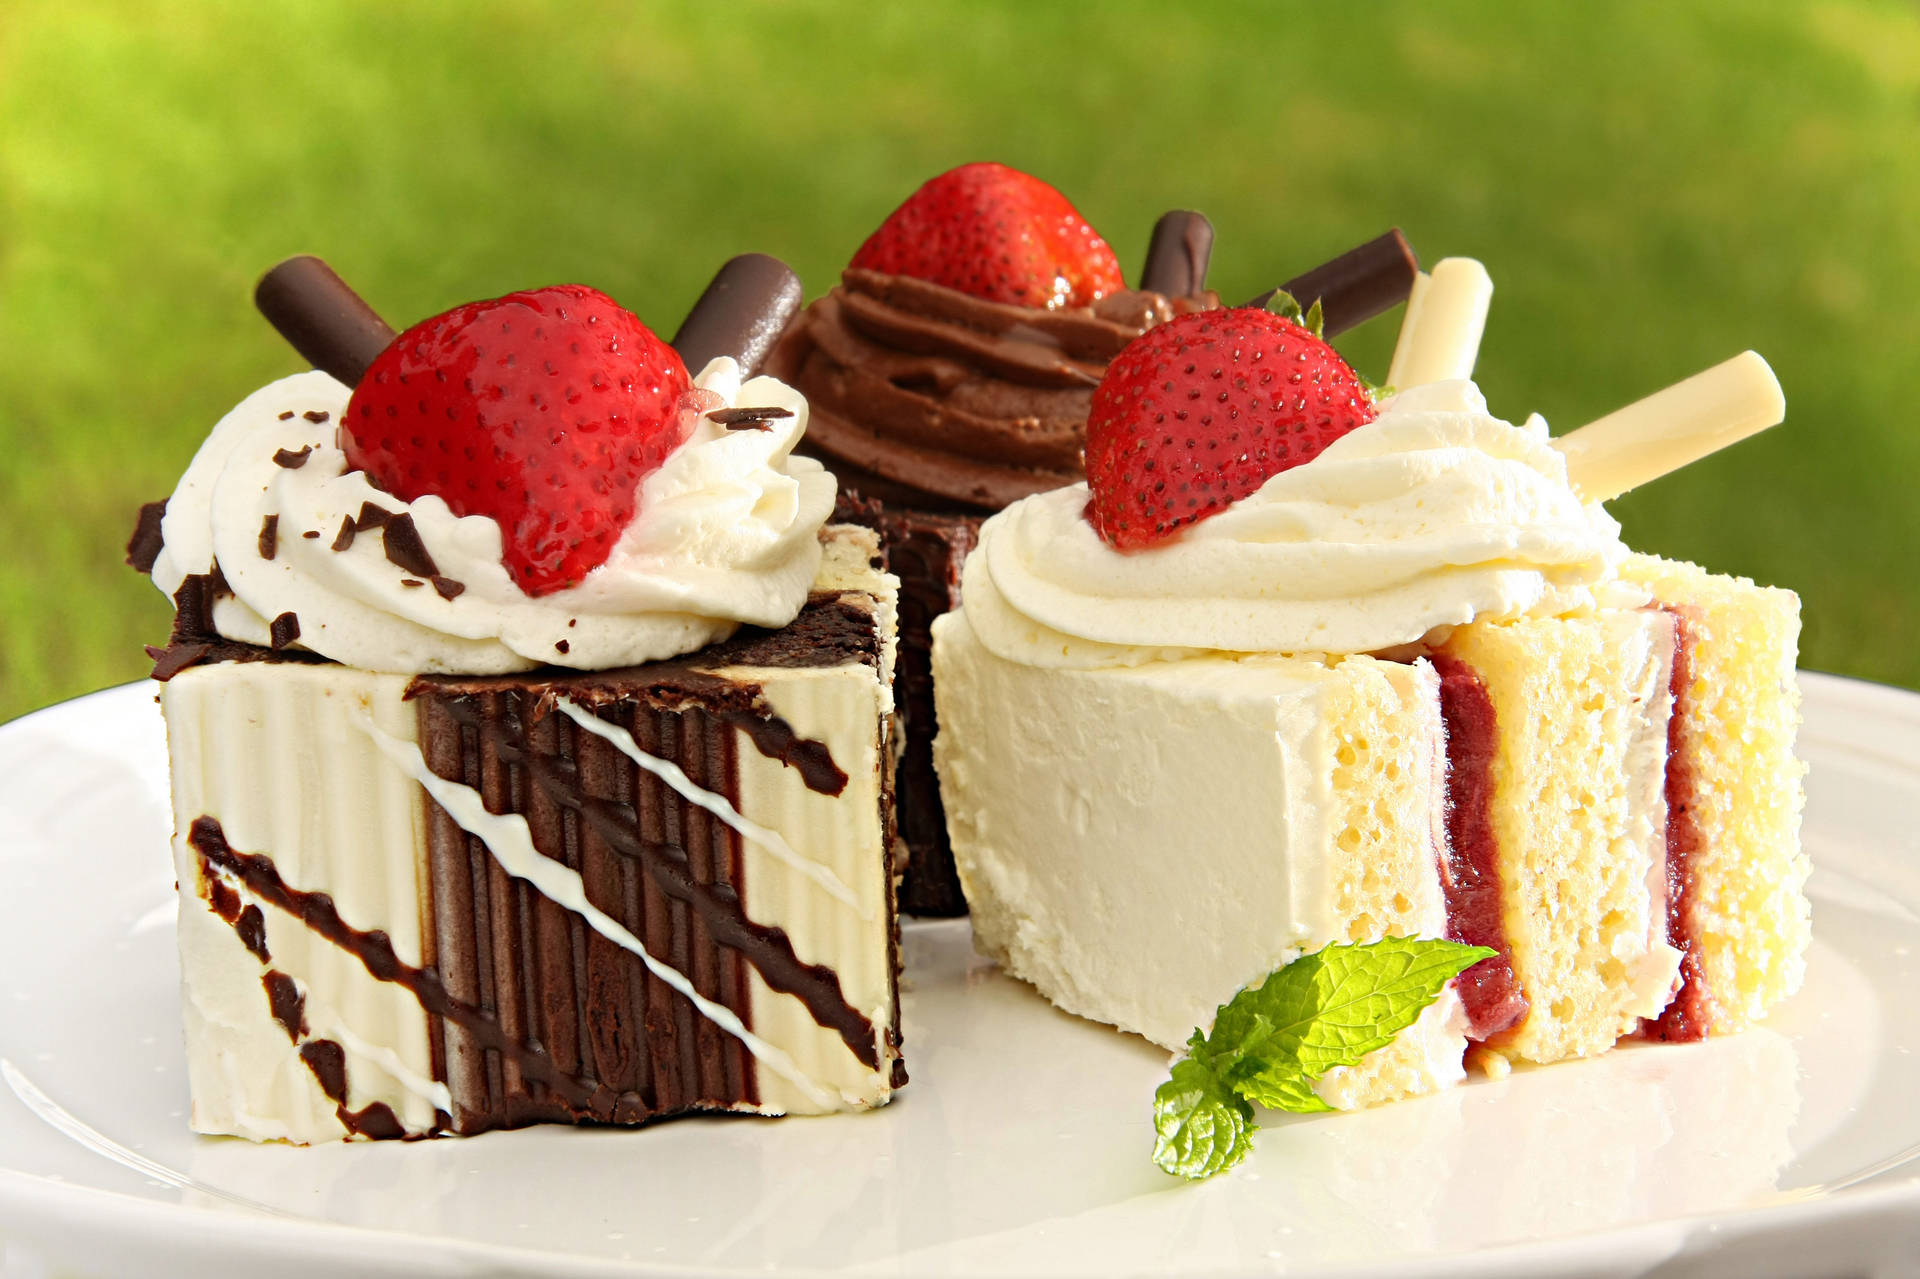 Delicious Chocolate and Strawberry Cake Wallpaper